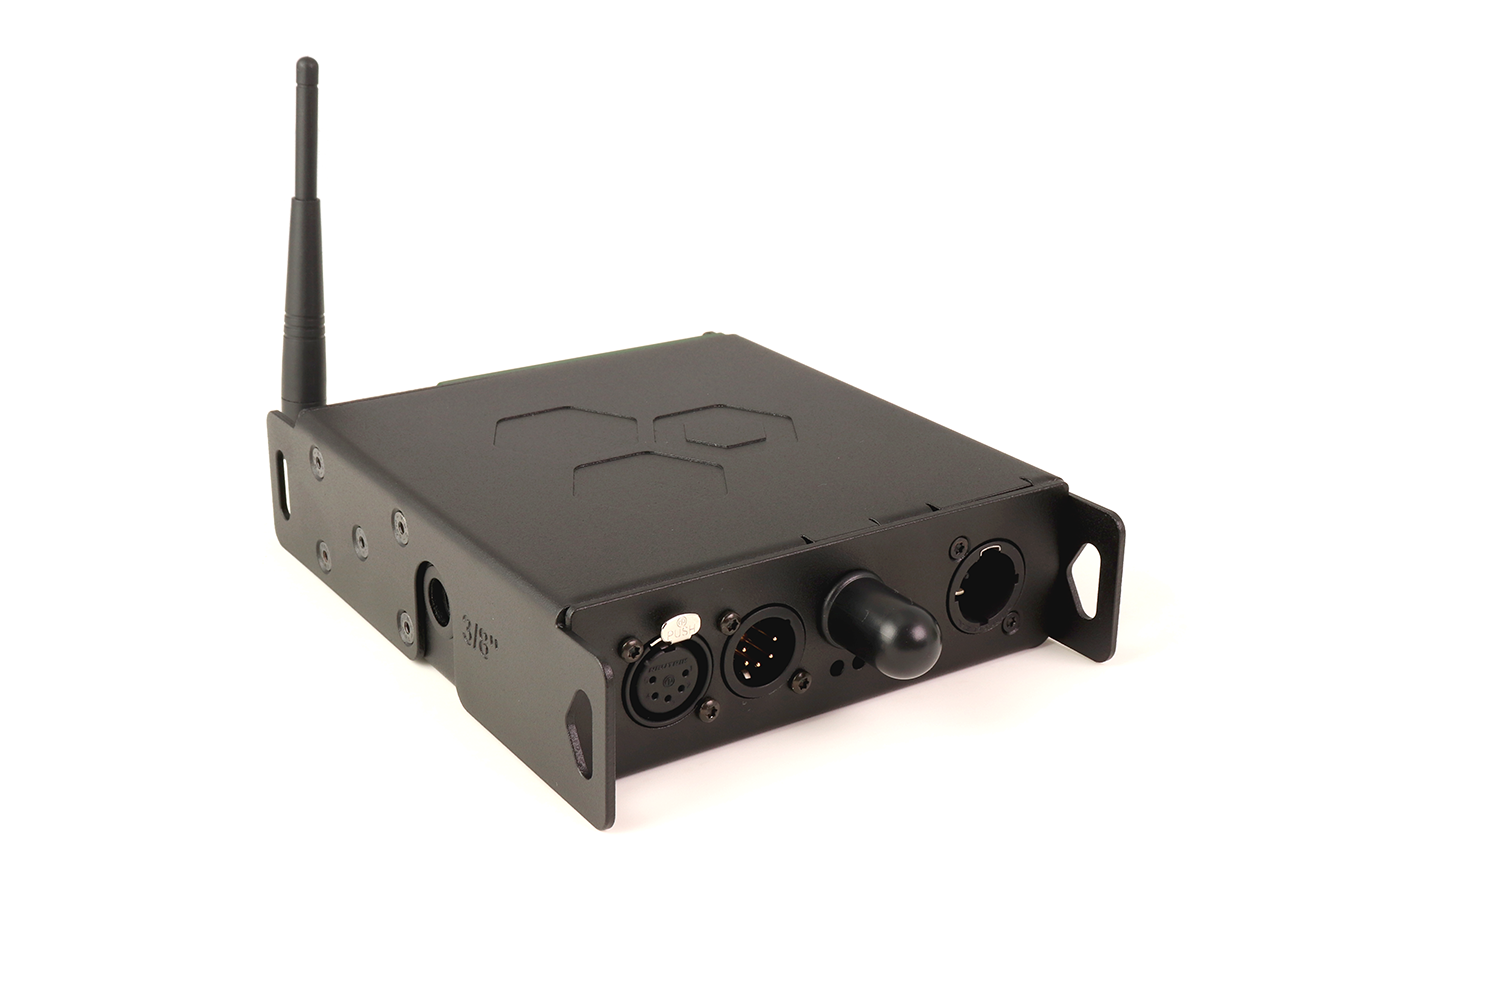  1 Uni DMX/RDM transceiver with WiFi and Bluetooth